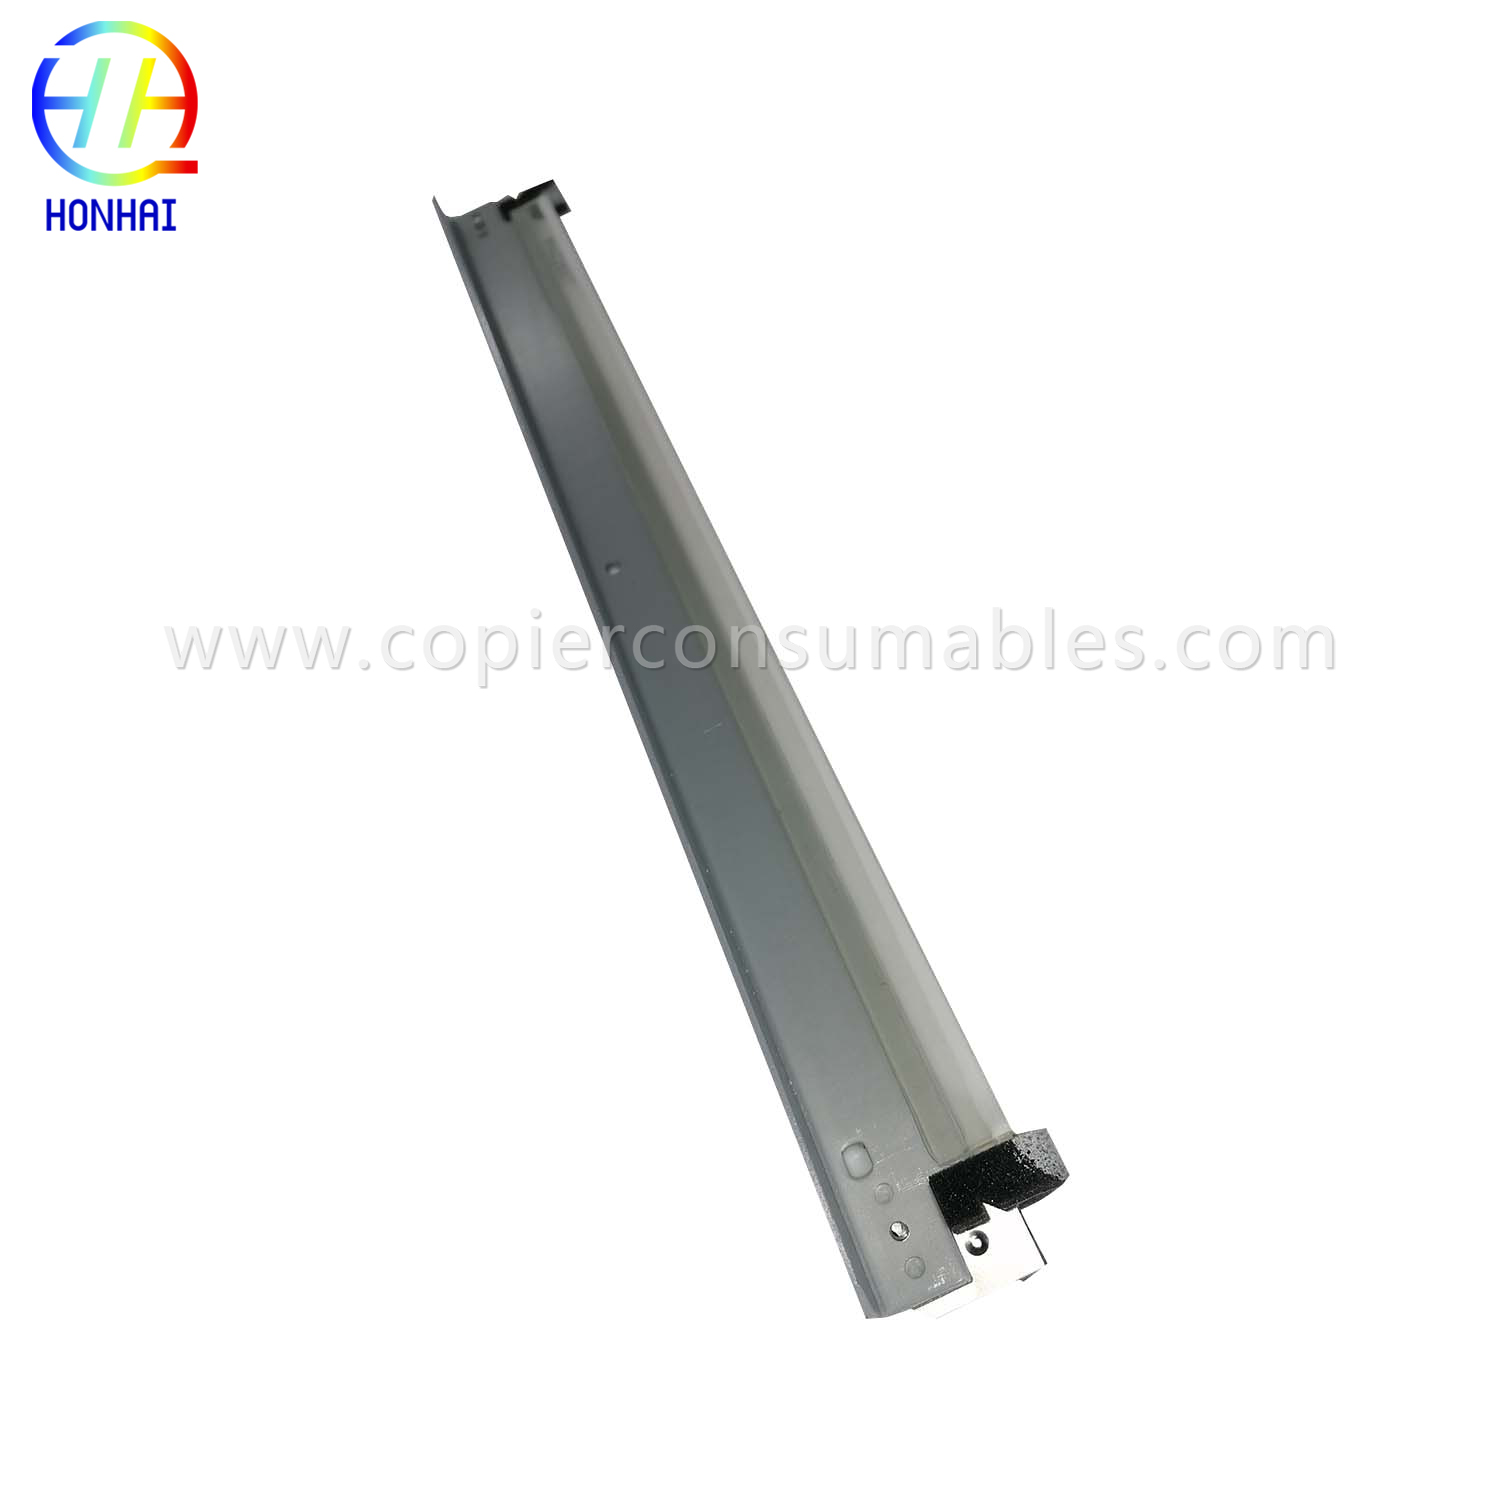 Transfer Belt Cleaning Blade for Canon IR ADVANCE C5035 C5051 C5240 C5250 (5) 拷贝